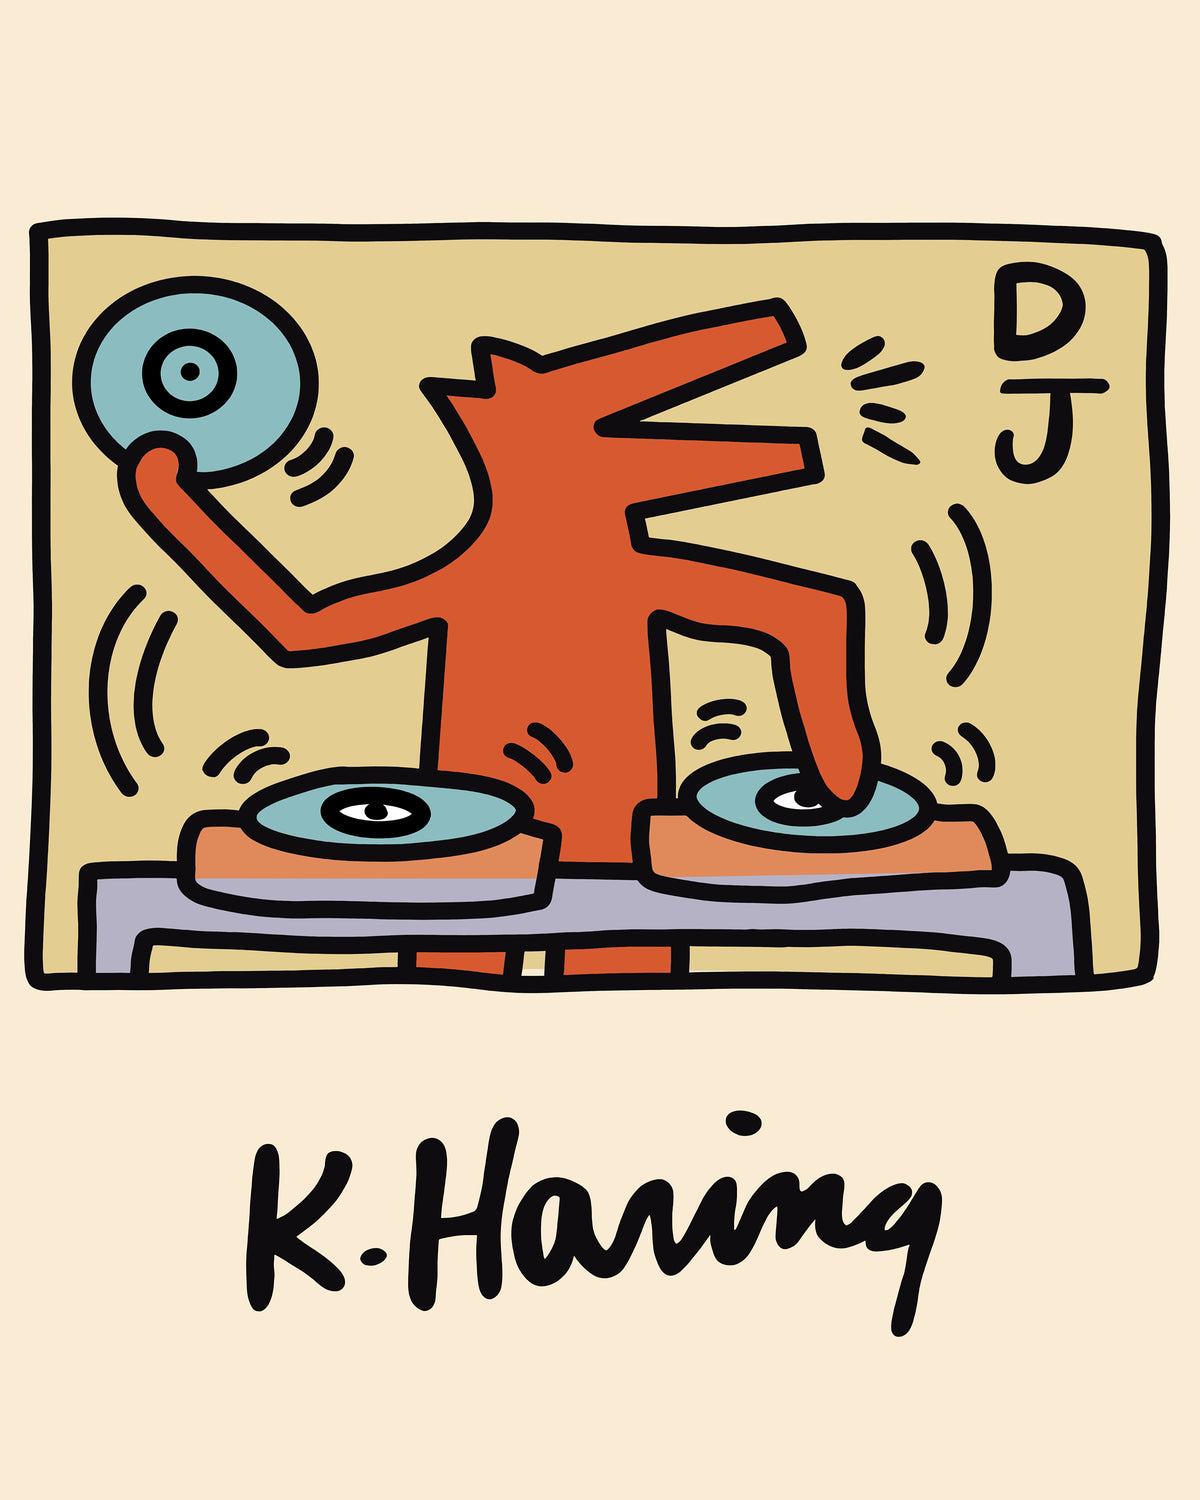 Keith Haring inspired design I did! DJ Cat.